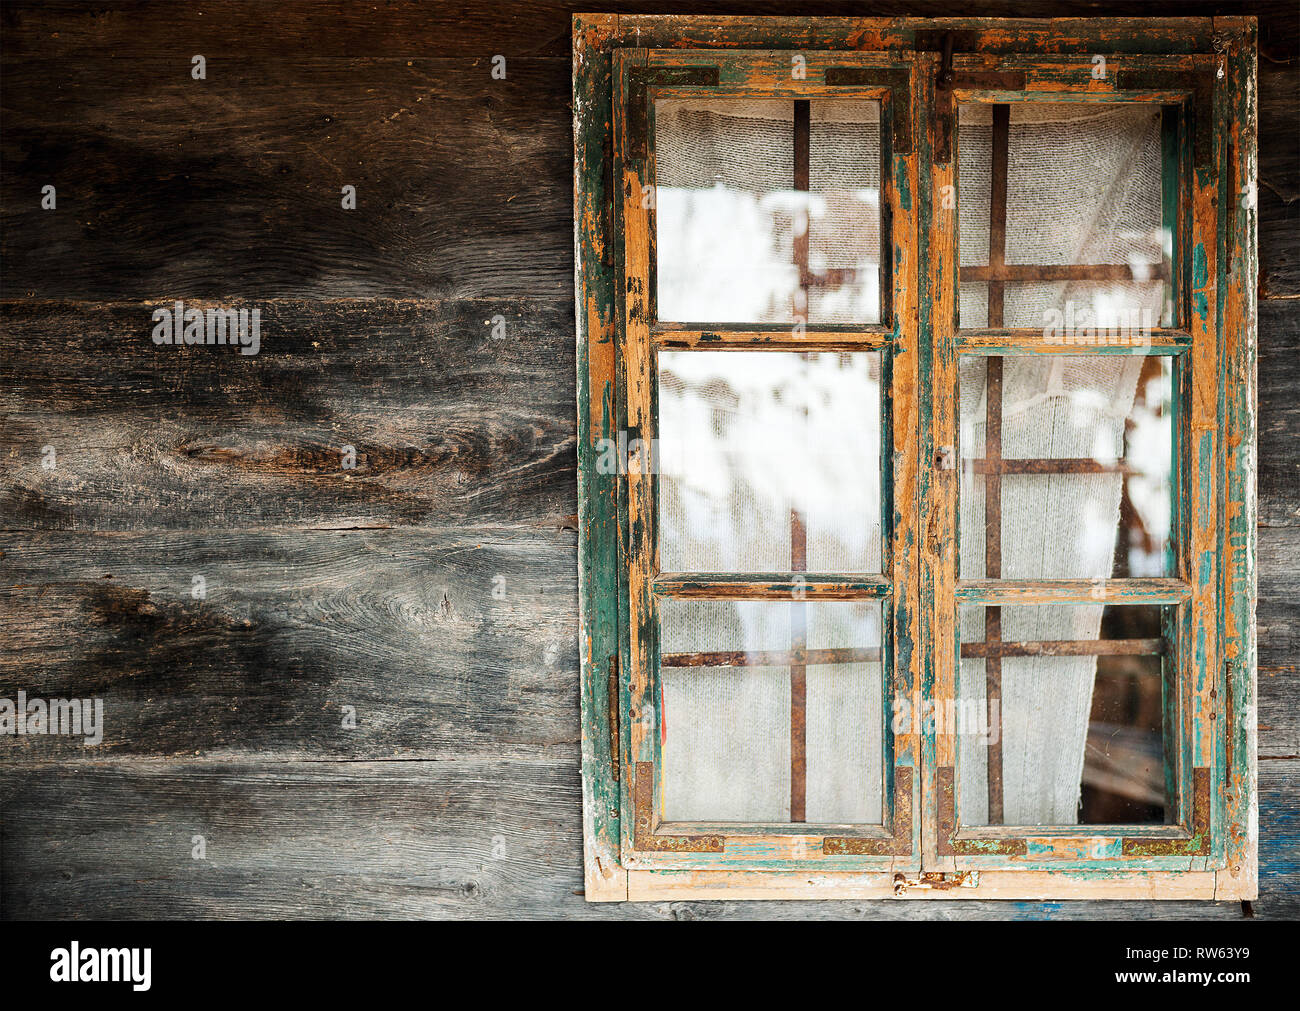 Abstract of an old wooden house, closeup view on wooden window frame and wall. Stock Photo